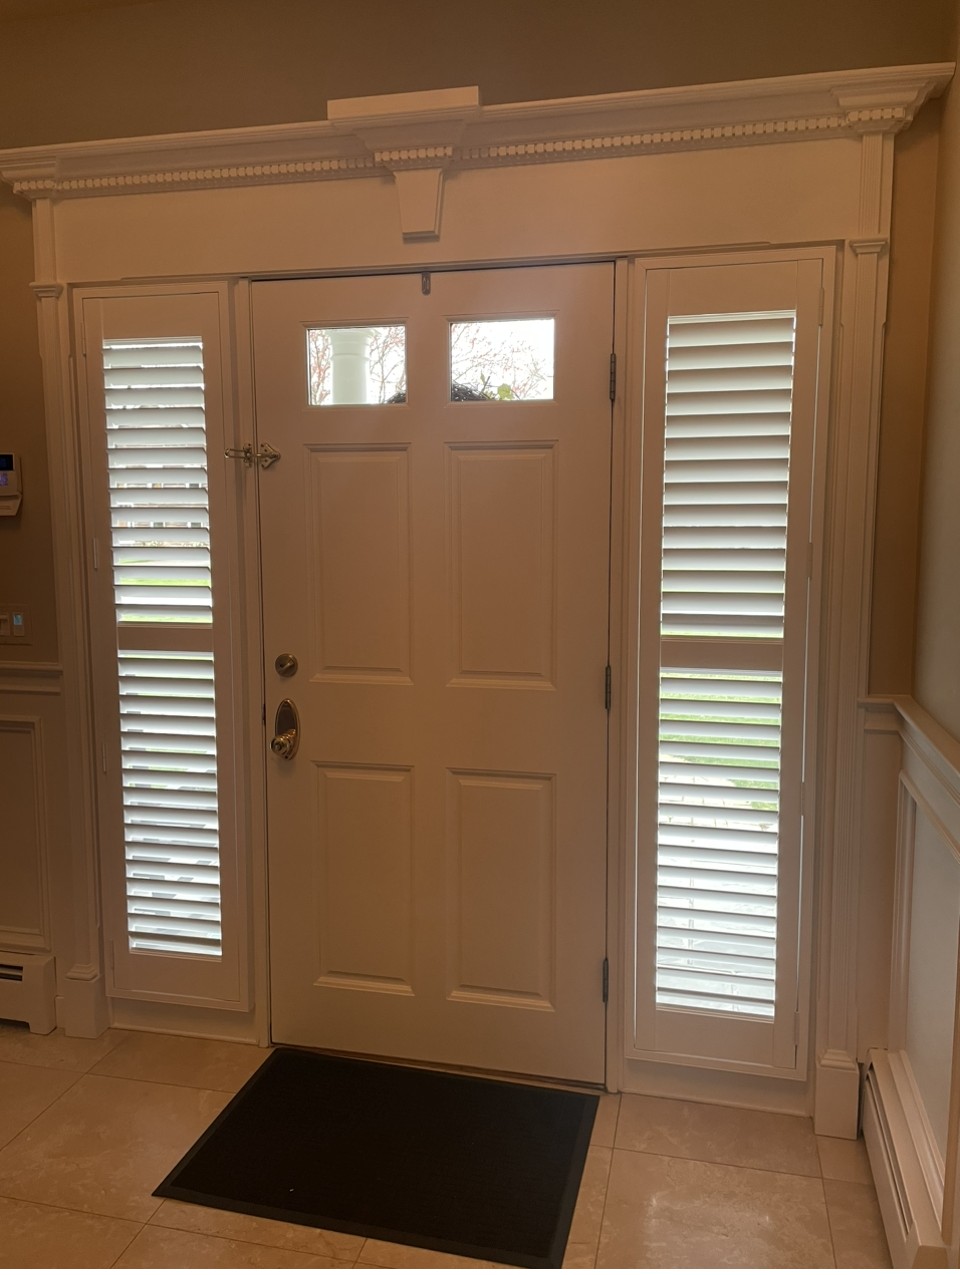 Beauty and Quality of Hunter Douglas Louvered Shutters with Hidden Tilts in Wyckoff, NJ